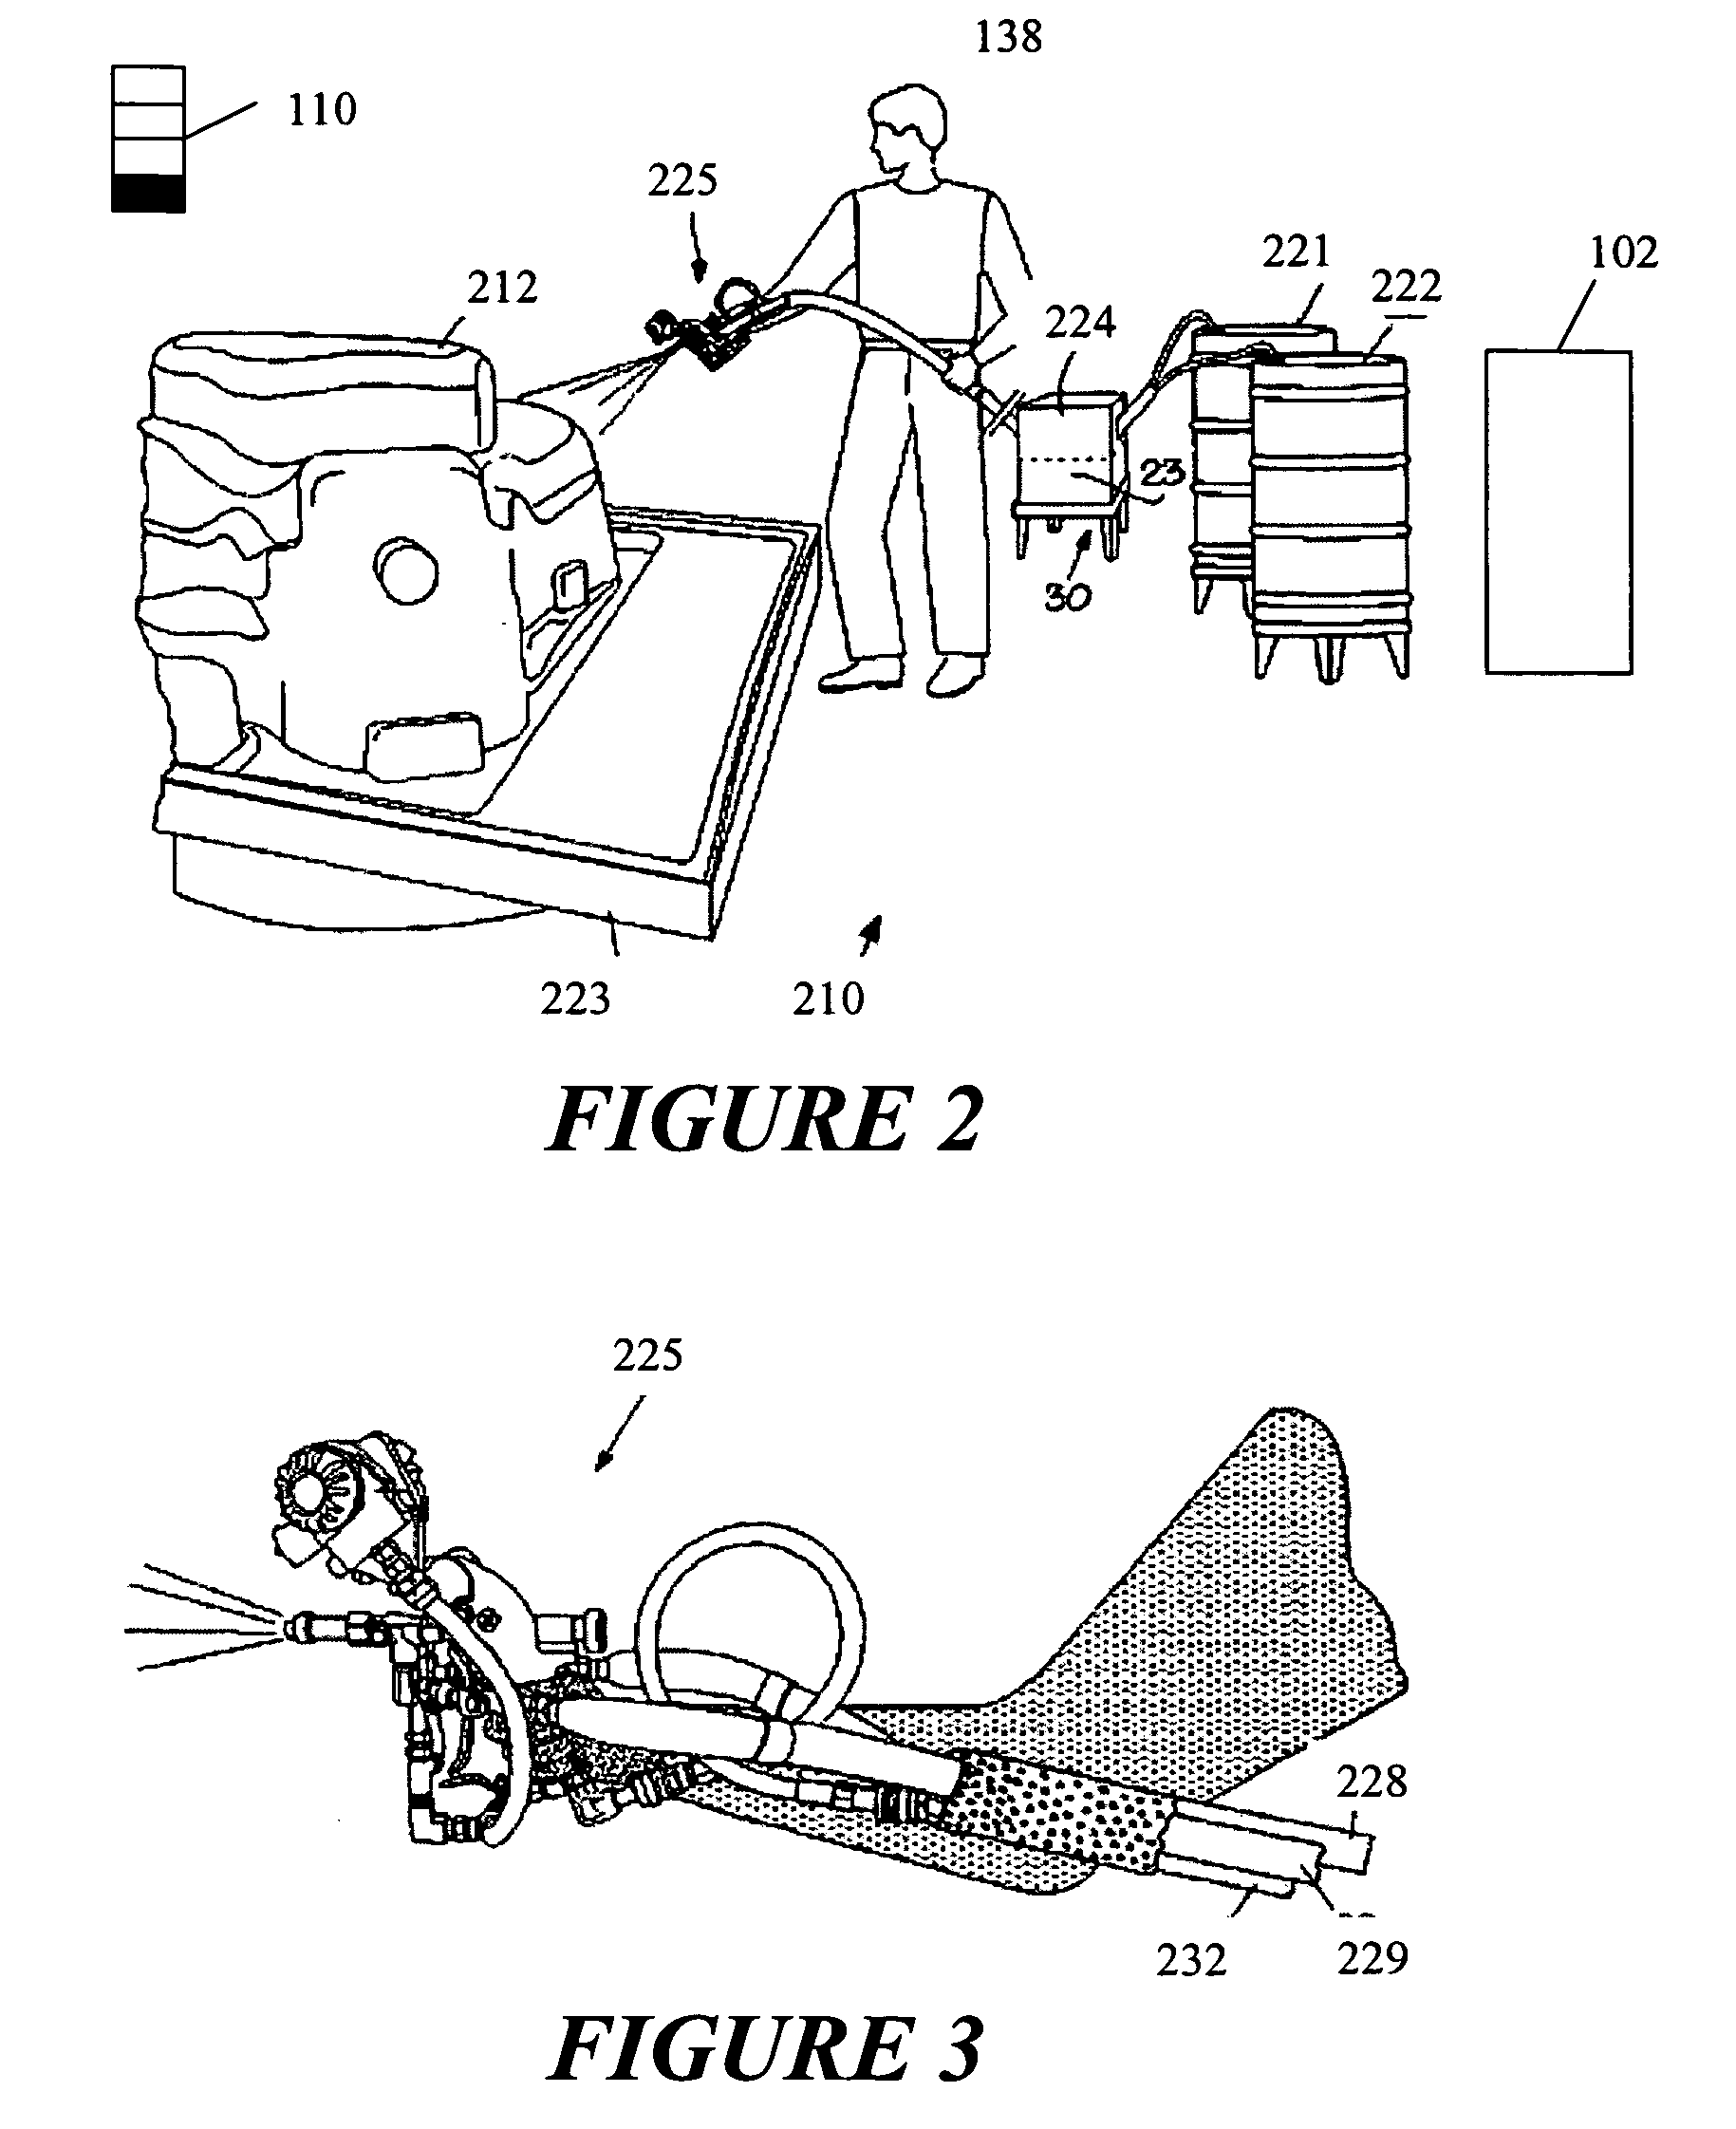 Systems and methods for providing electronic quality control in a process for applying a polyurethane to a substrate